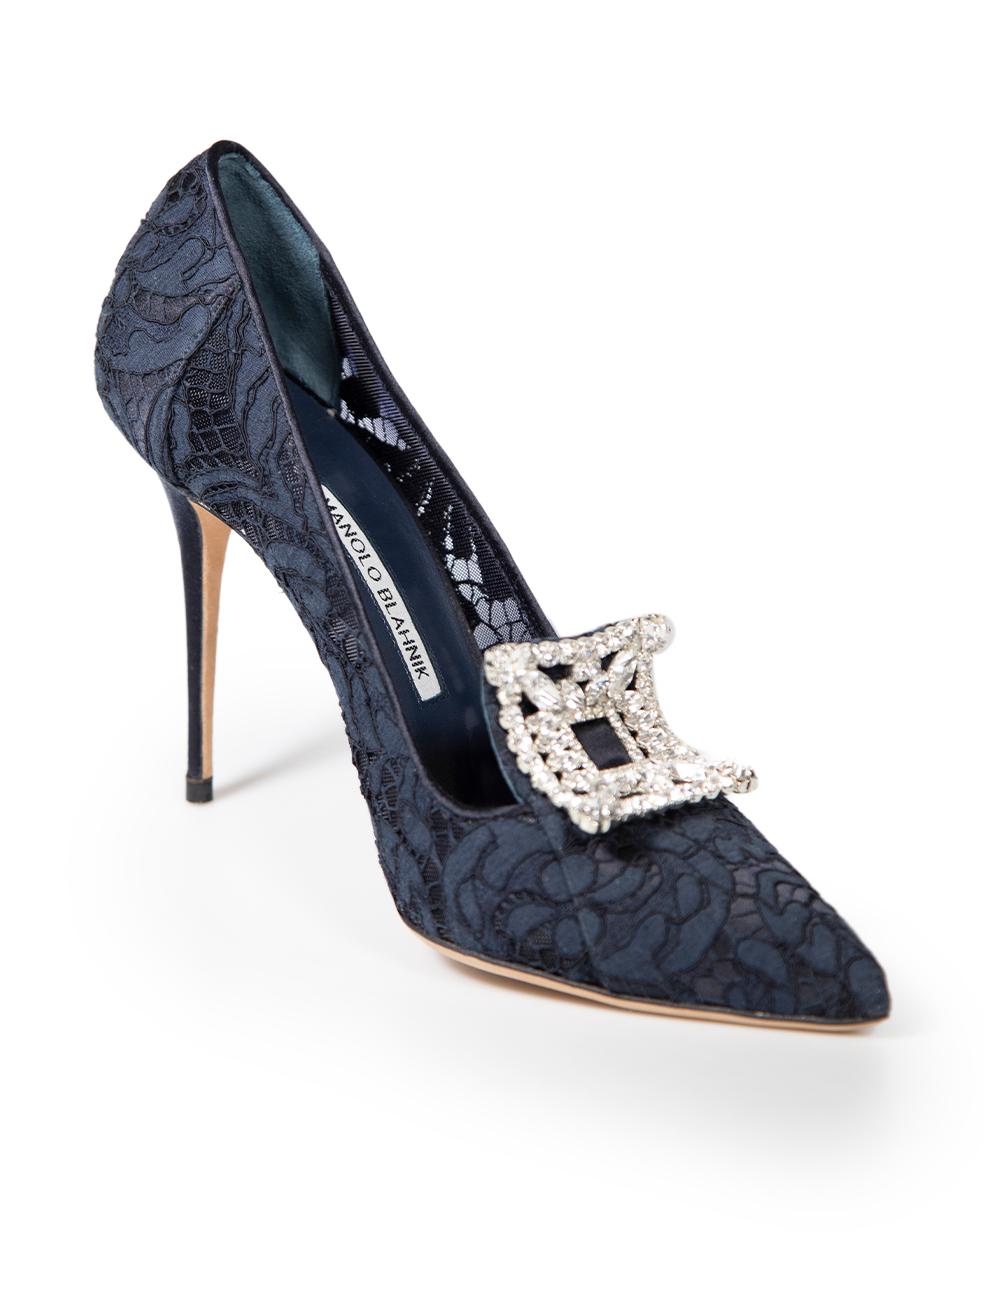 CONDITION is Very good. Hardly any visible wear to pumps is evident on this used Manolo Blahnik designer resale item.
 
Details
Navy
Lace
Pumps
Slip on
Point toe
Crystal buckle detail
High heeled
 
Made in Italy
 
Composition
EXTERIOR: